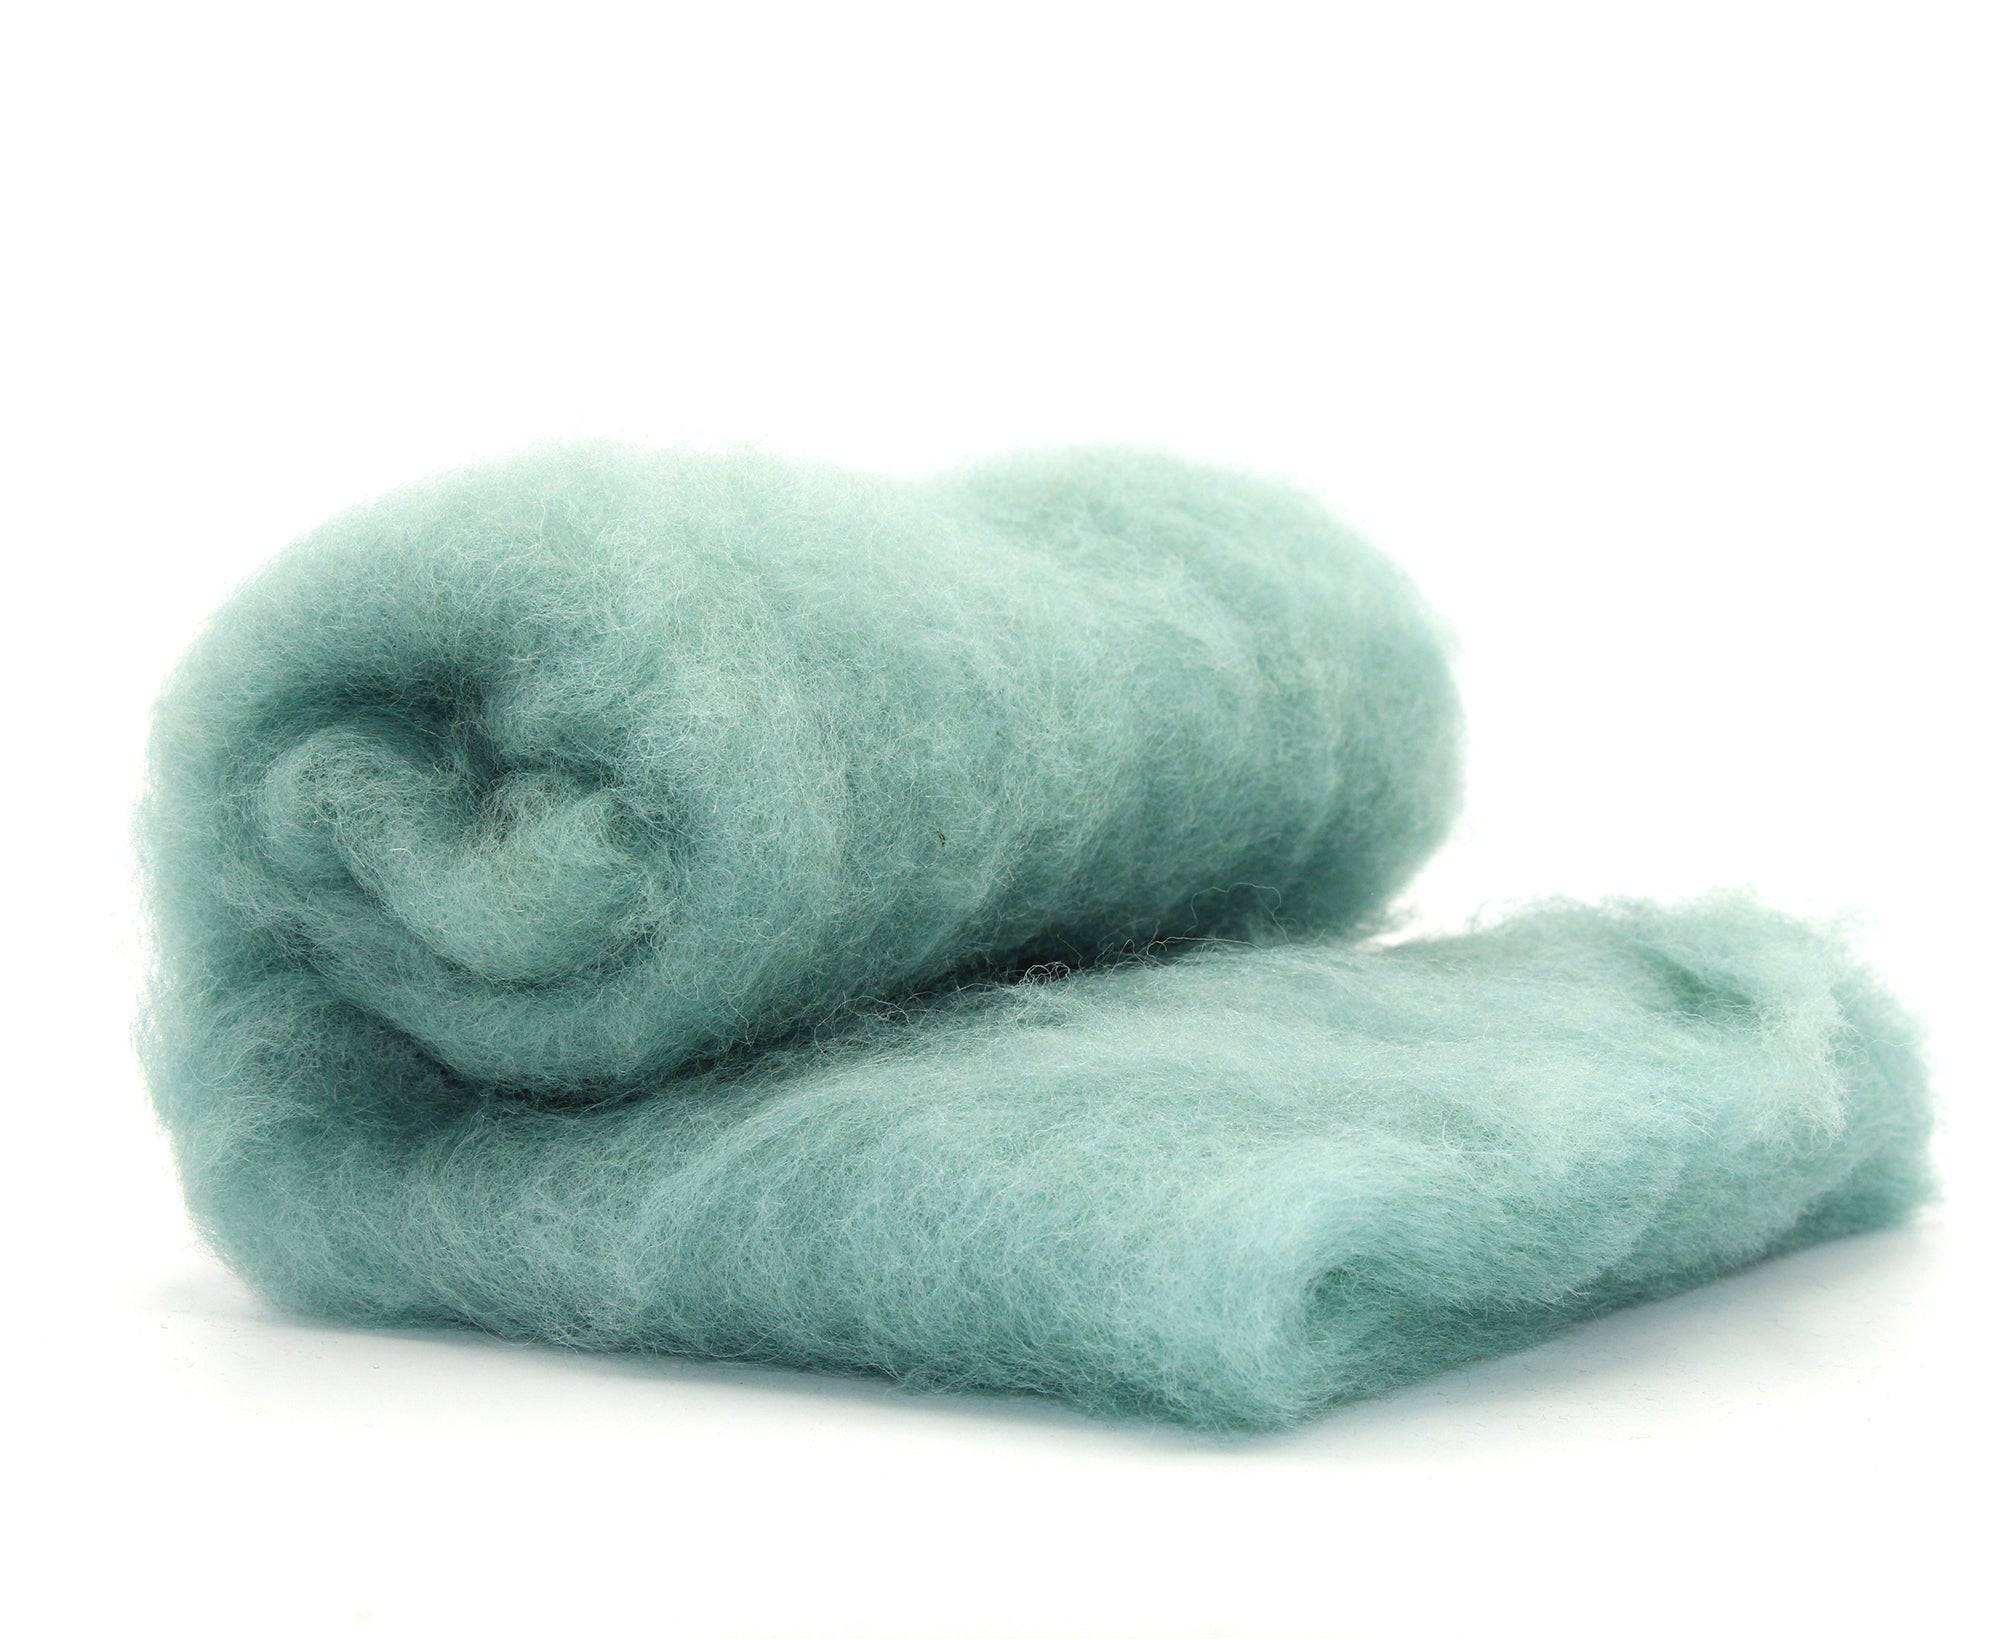 Carded Perendale Batt Teal - World of Wool